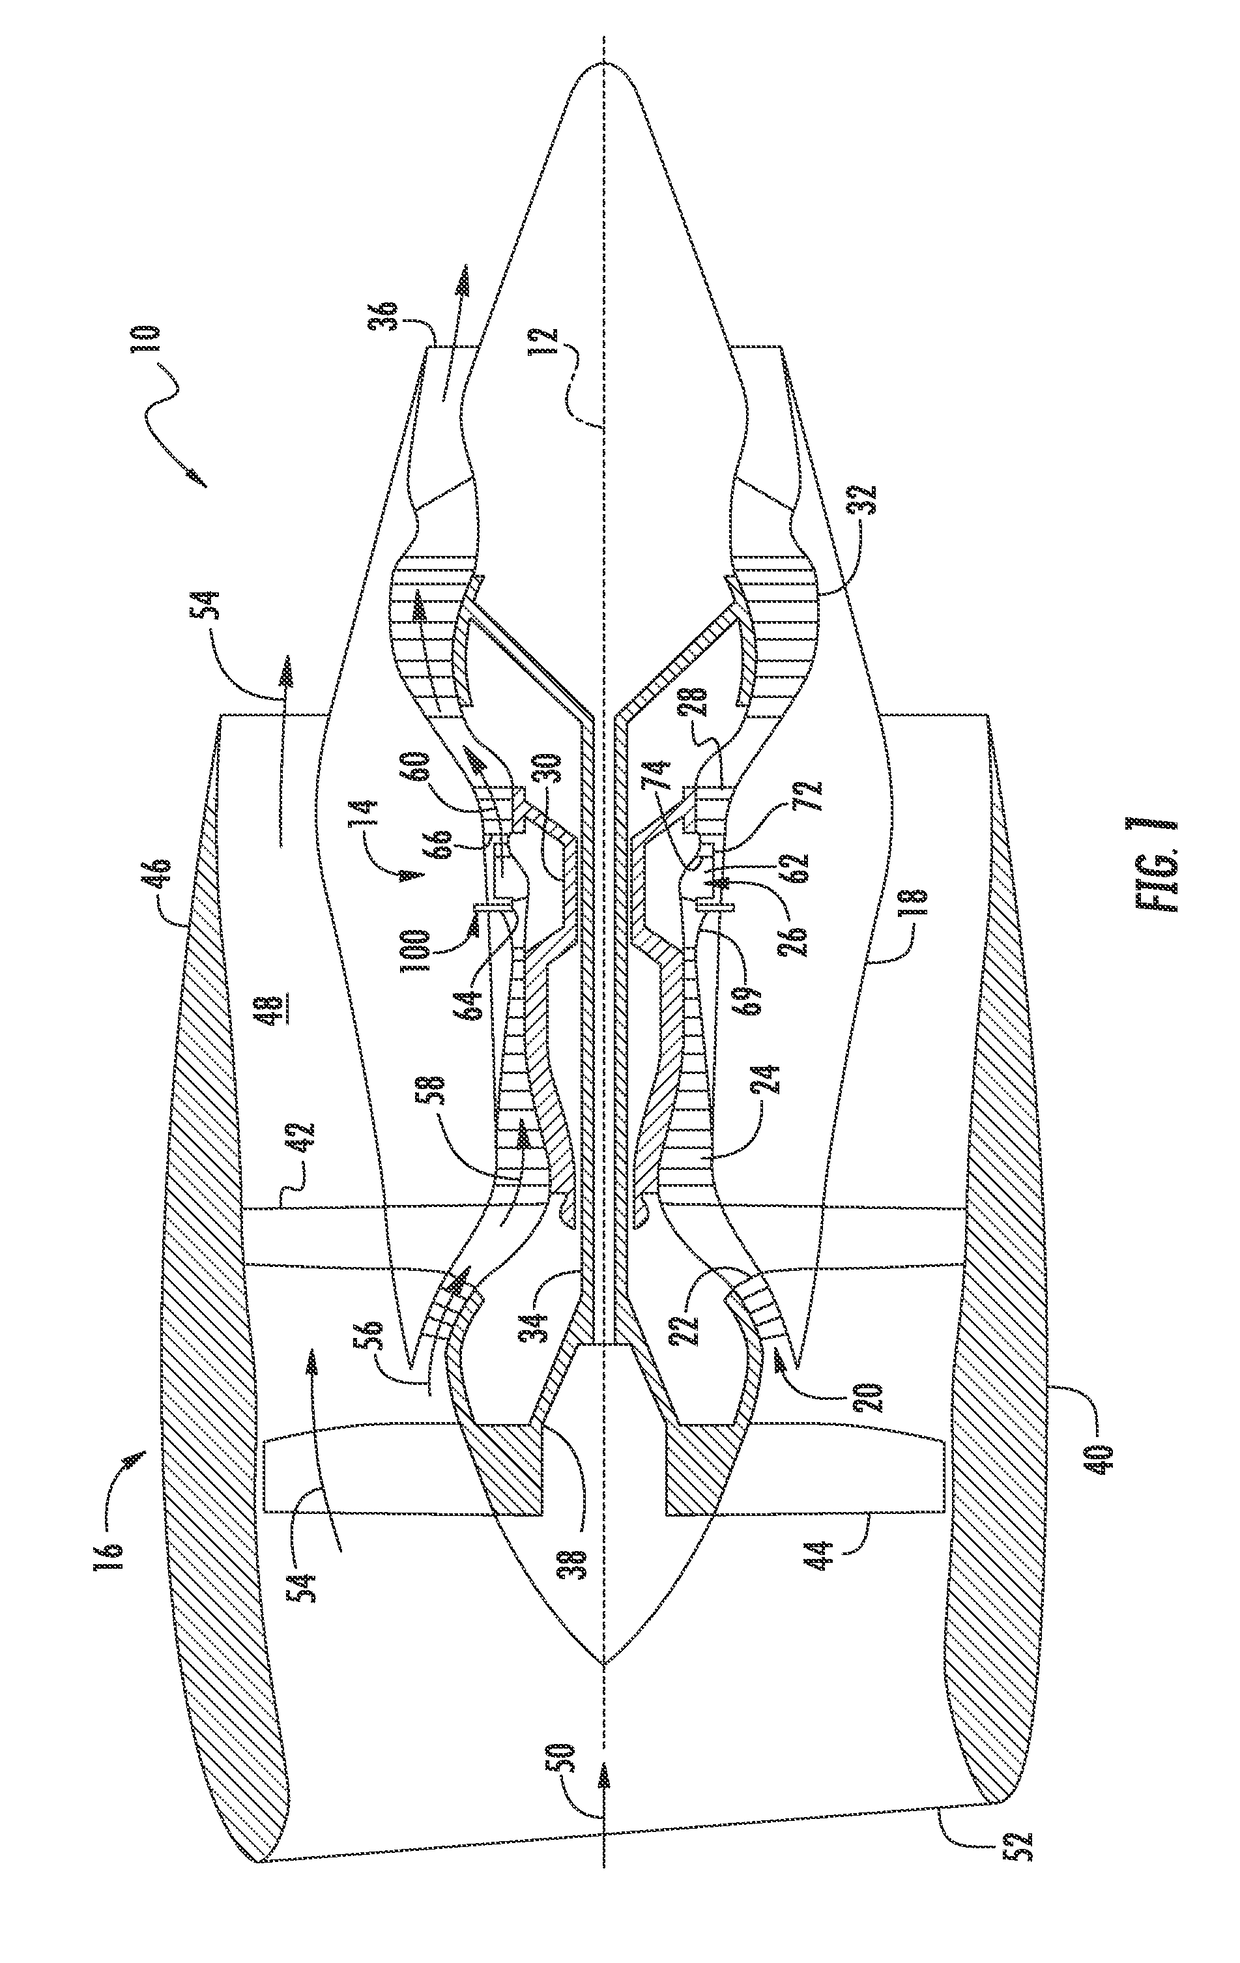 Torsional damping for gas turbine engines